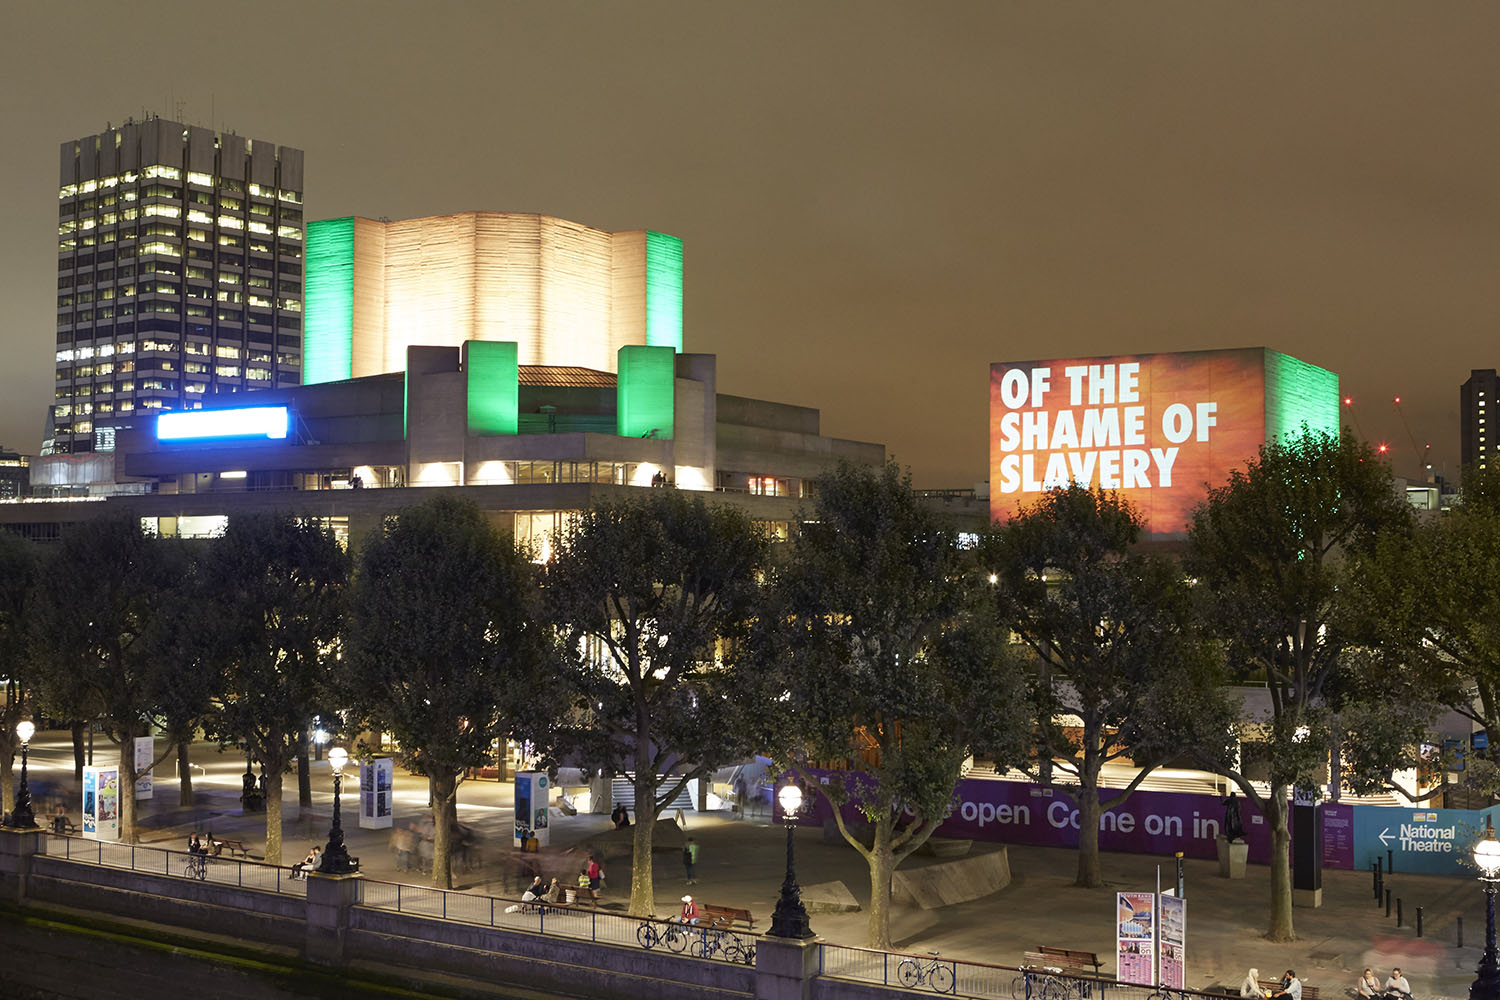 The flytower of the National Theatre in London with the words 